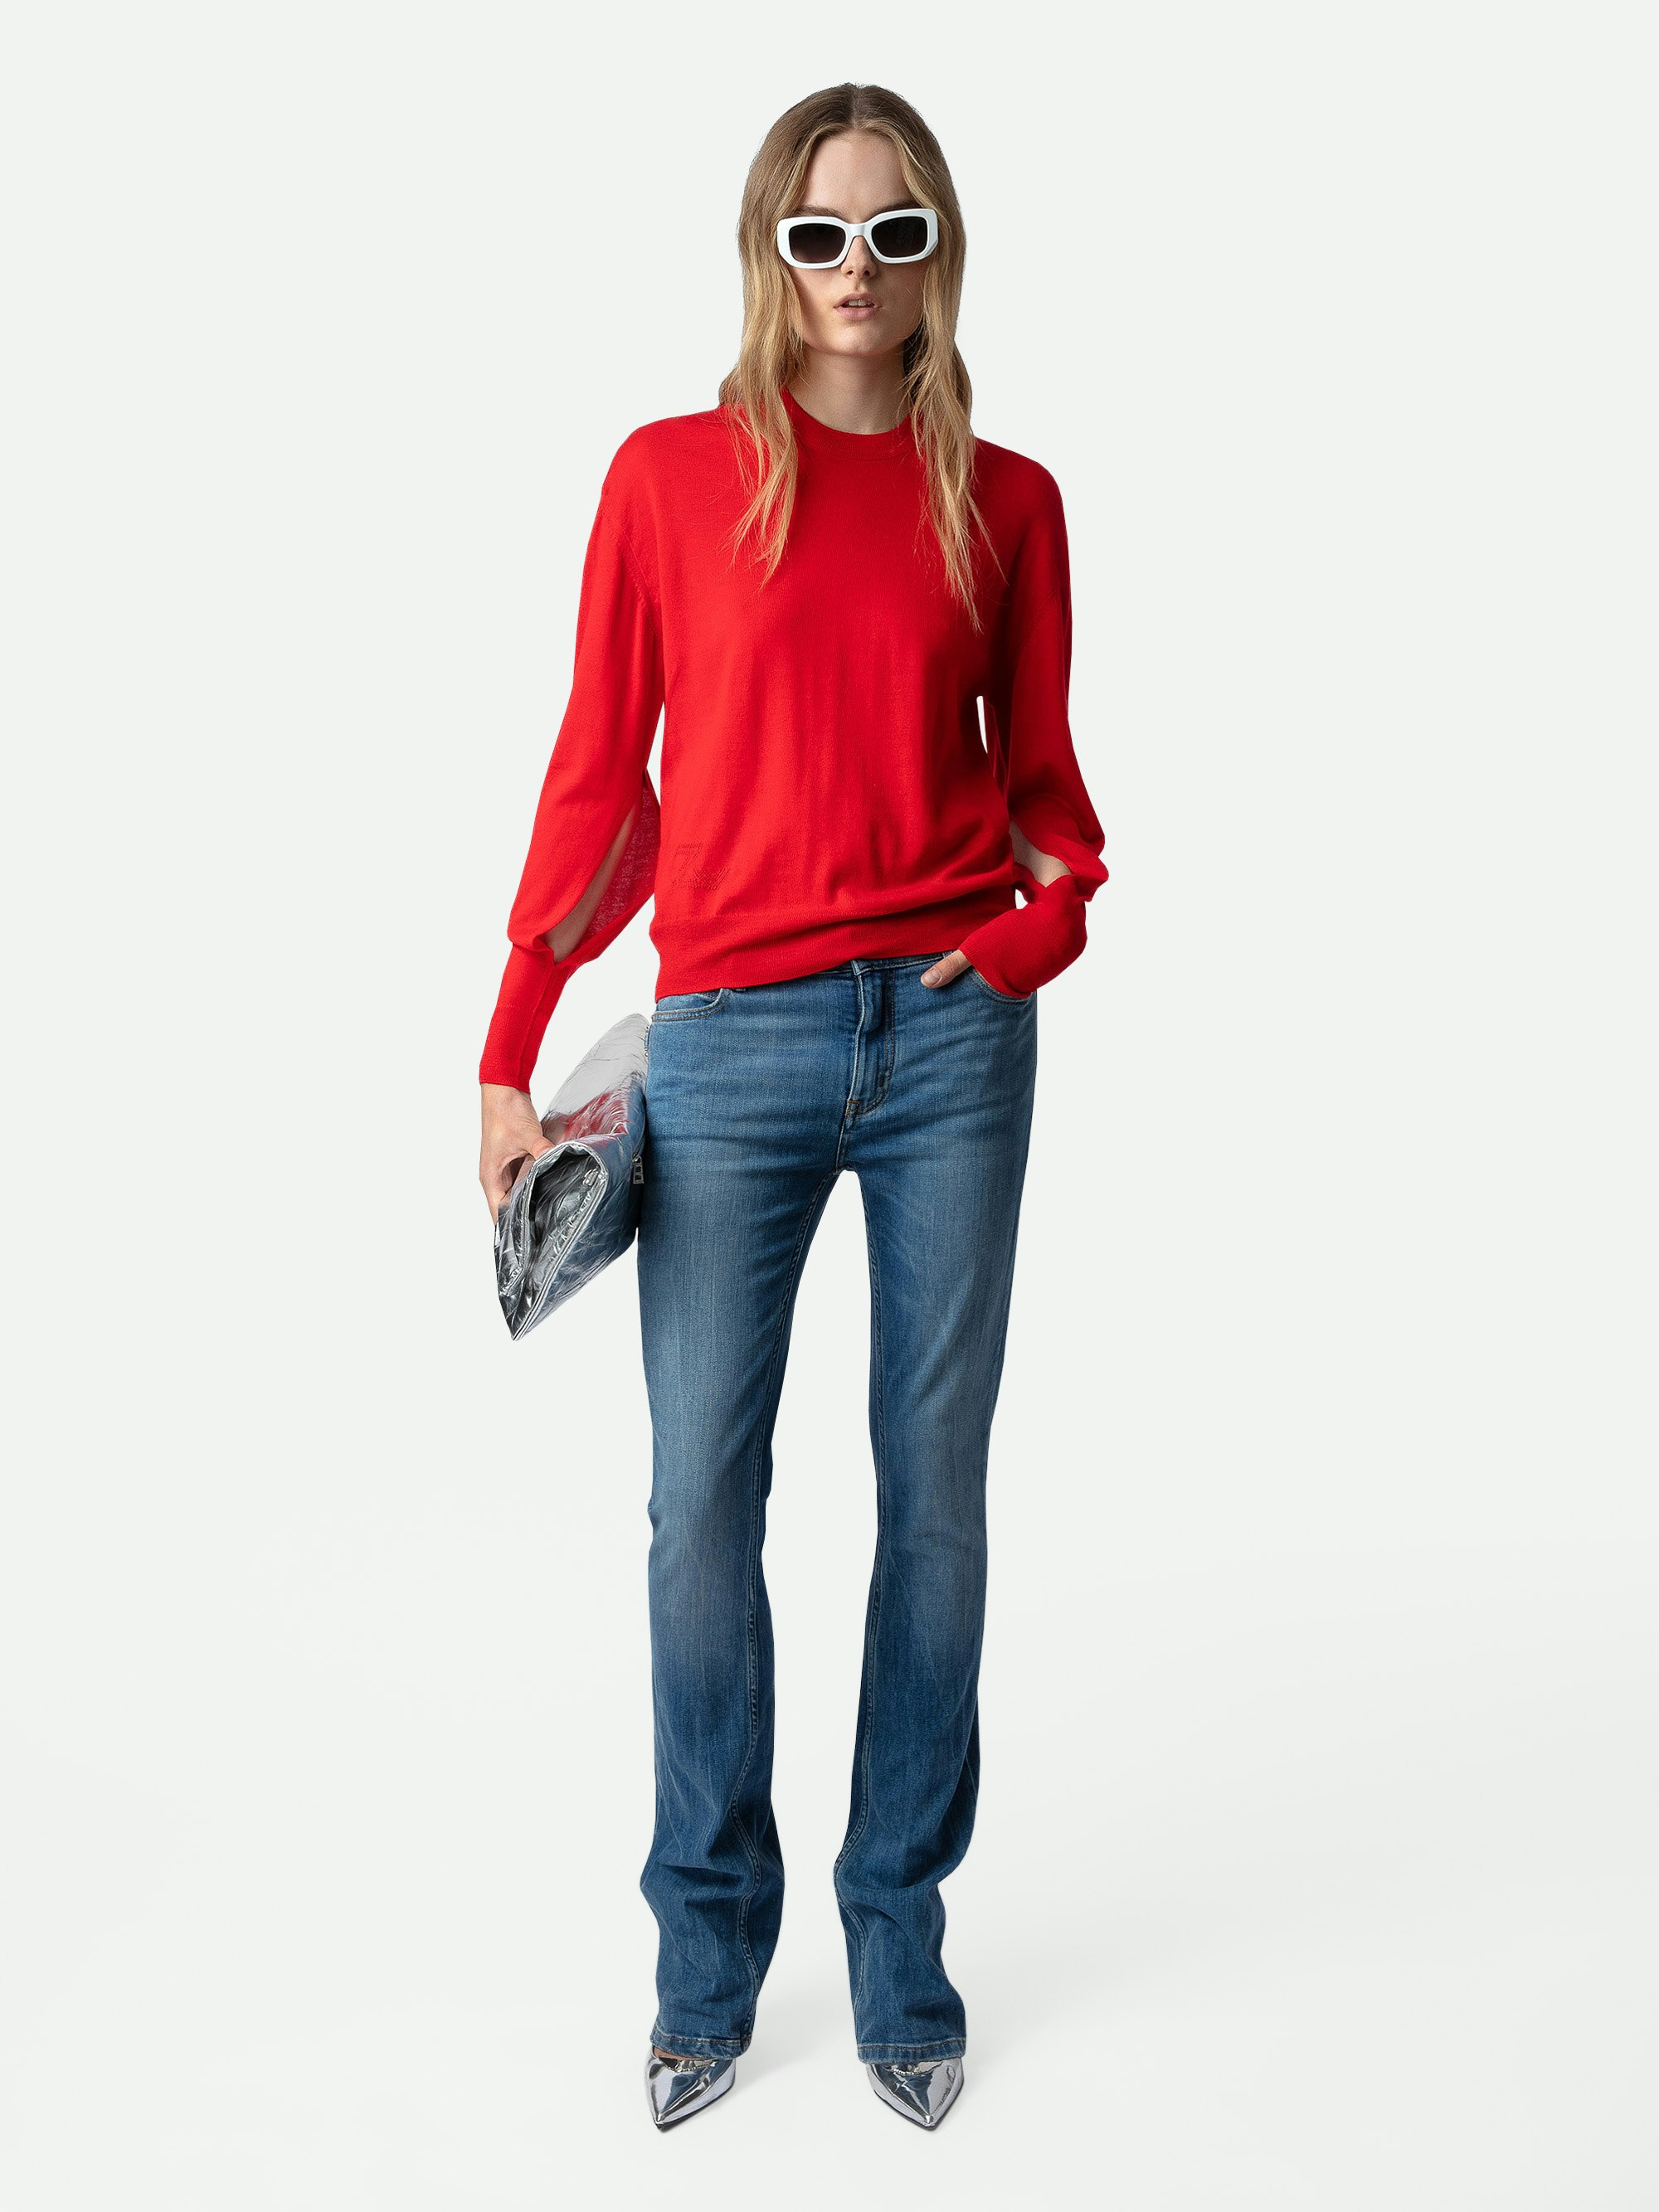 Emmy Sweater - Red merino wool round-neck jumper with long sleeves featuring a cut-out.